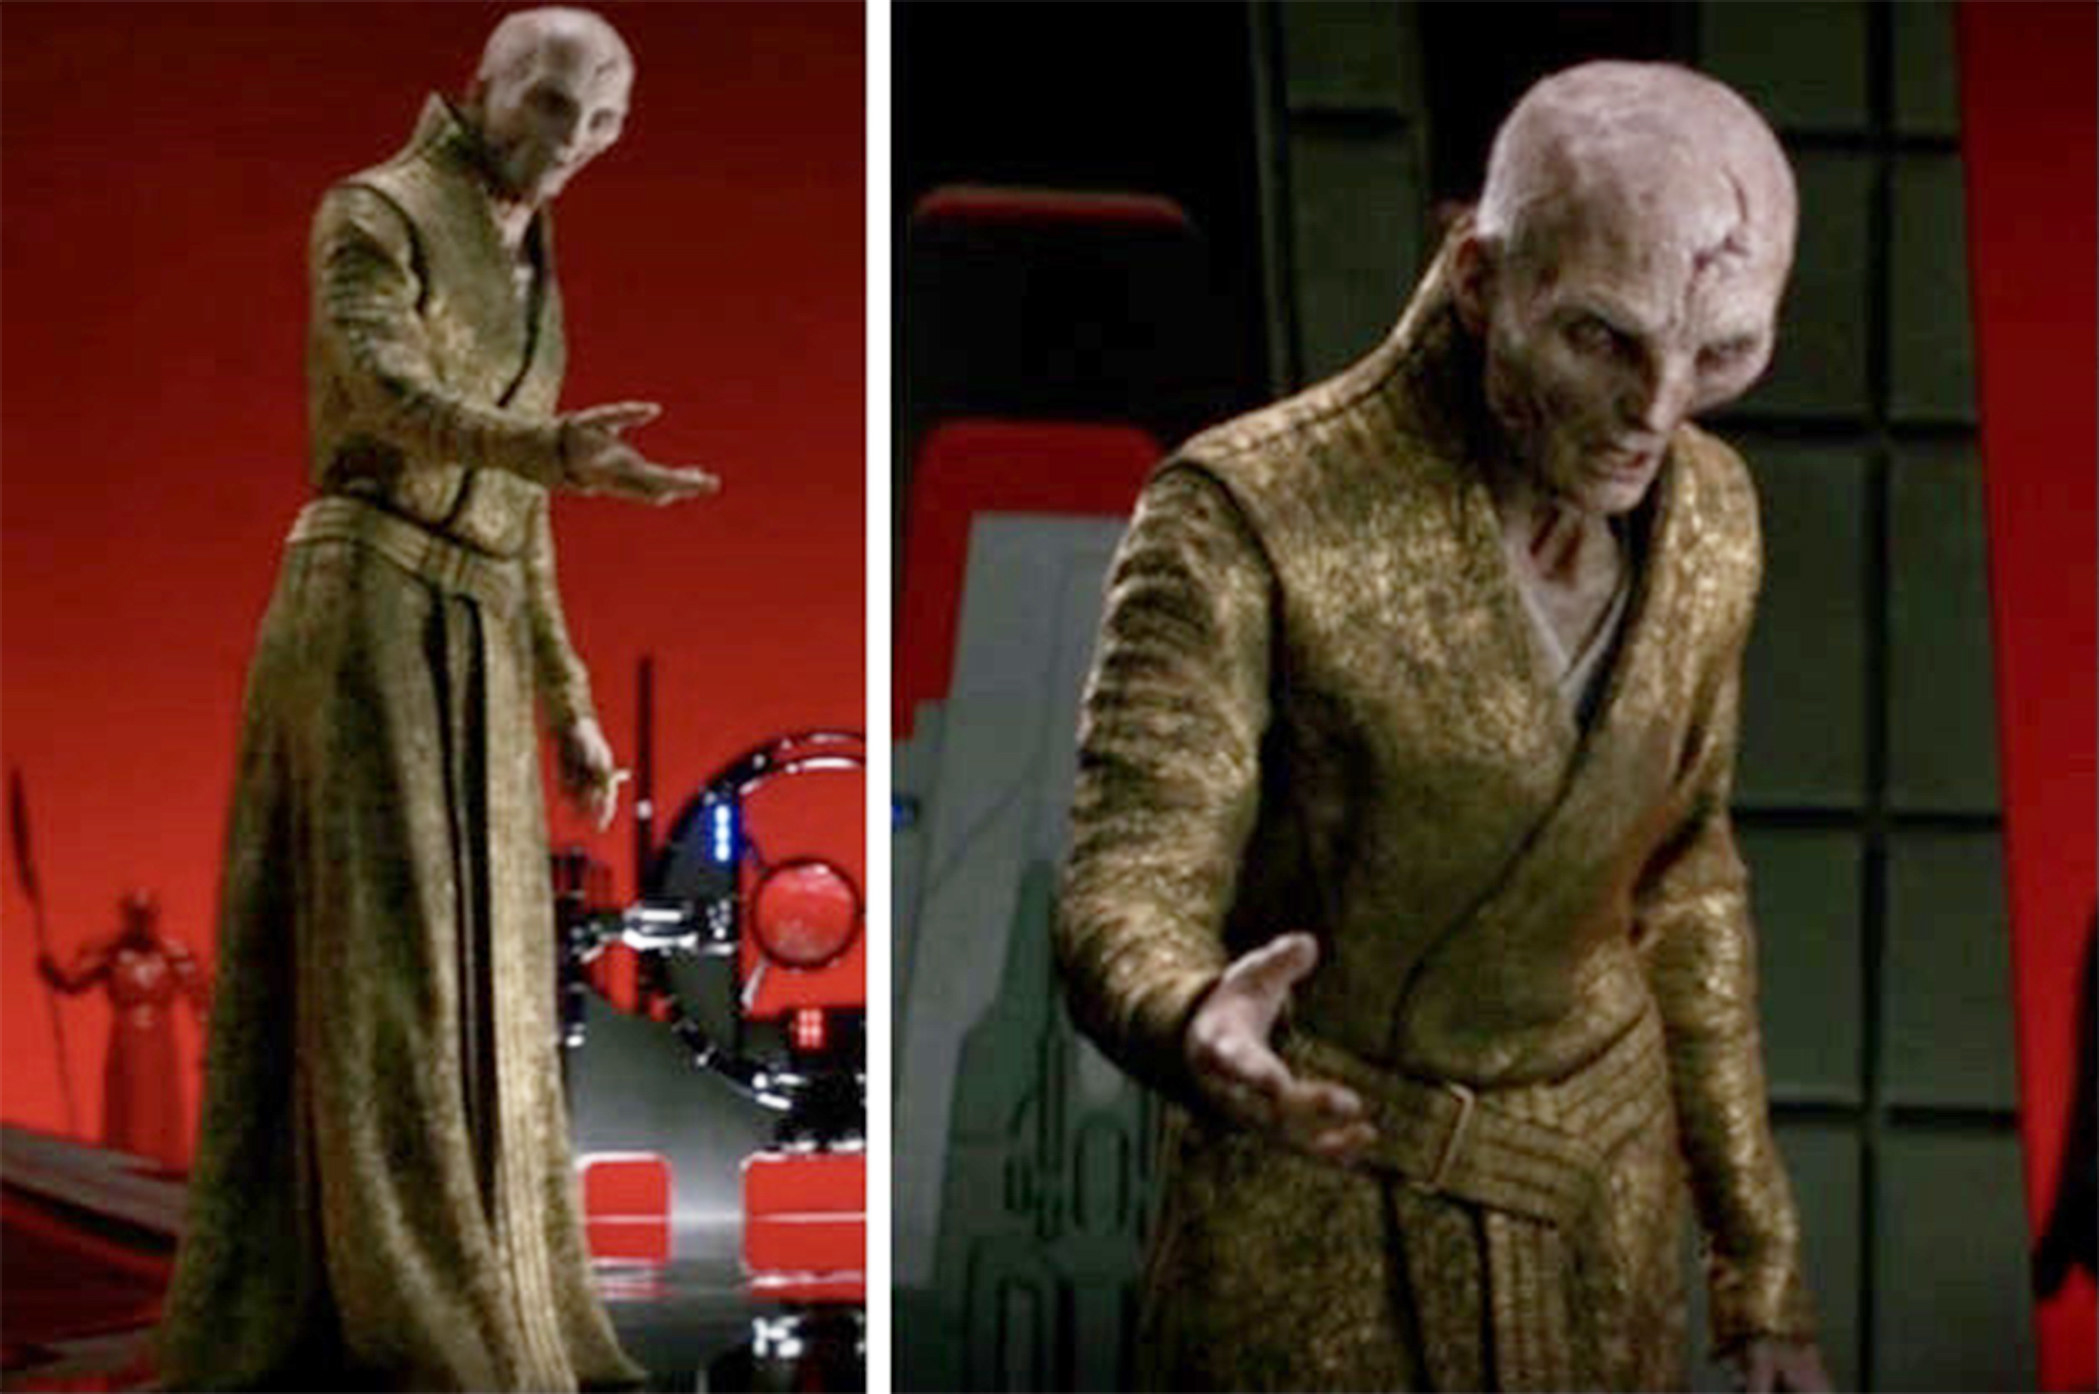 Left: Andy Serkis as Snoke wears a long belted robe and stretches out his arm as he stands in &quot;The Last Jedi&quot; Right: Andy Serkis as Snoke leans forward and gestures with his hand in &quot;The Last Jedi&quot;